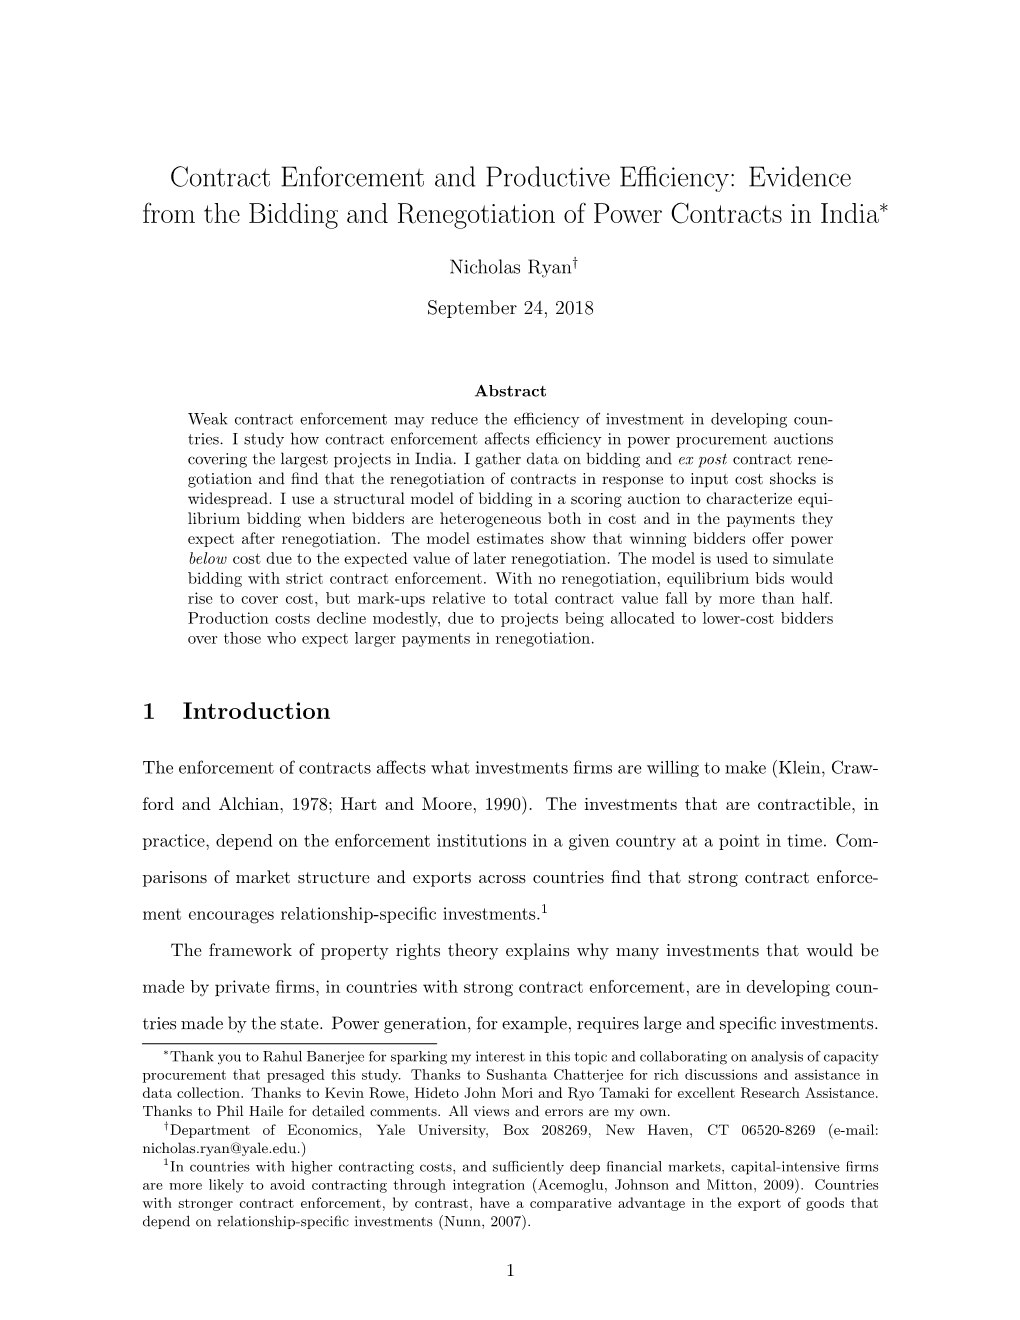 Contract Enforcement and Productive Efficiency: Evidence from the Bidding and Renegotiation of Power Contracts in India